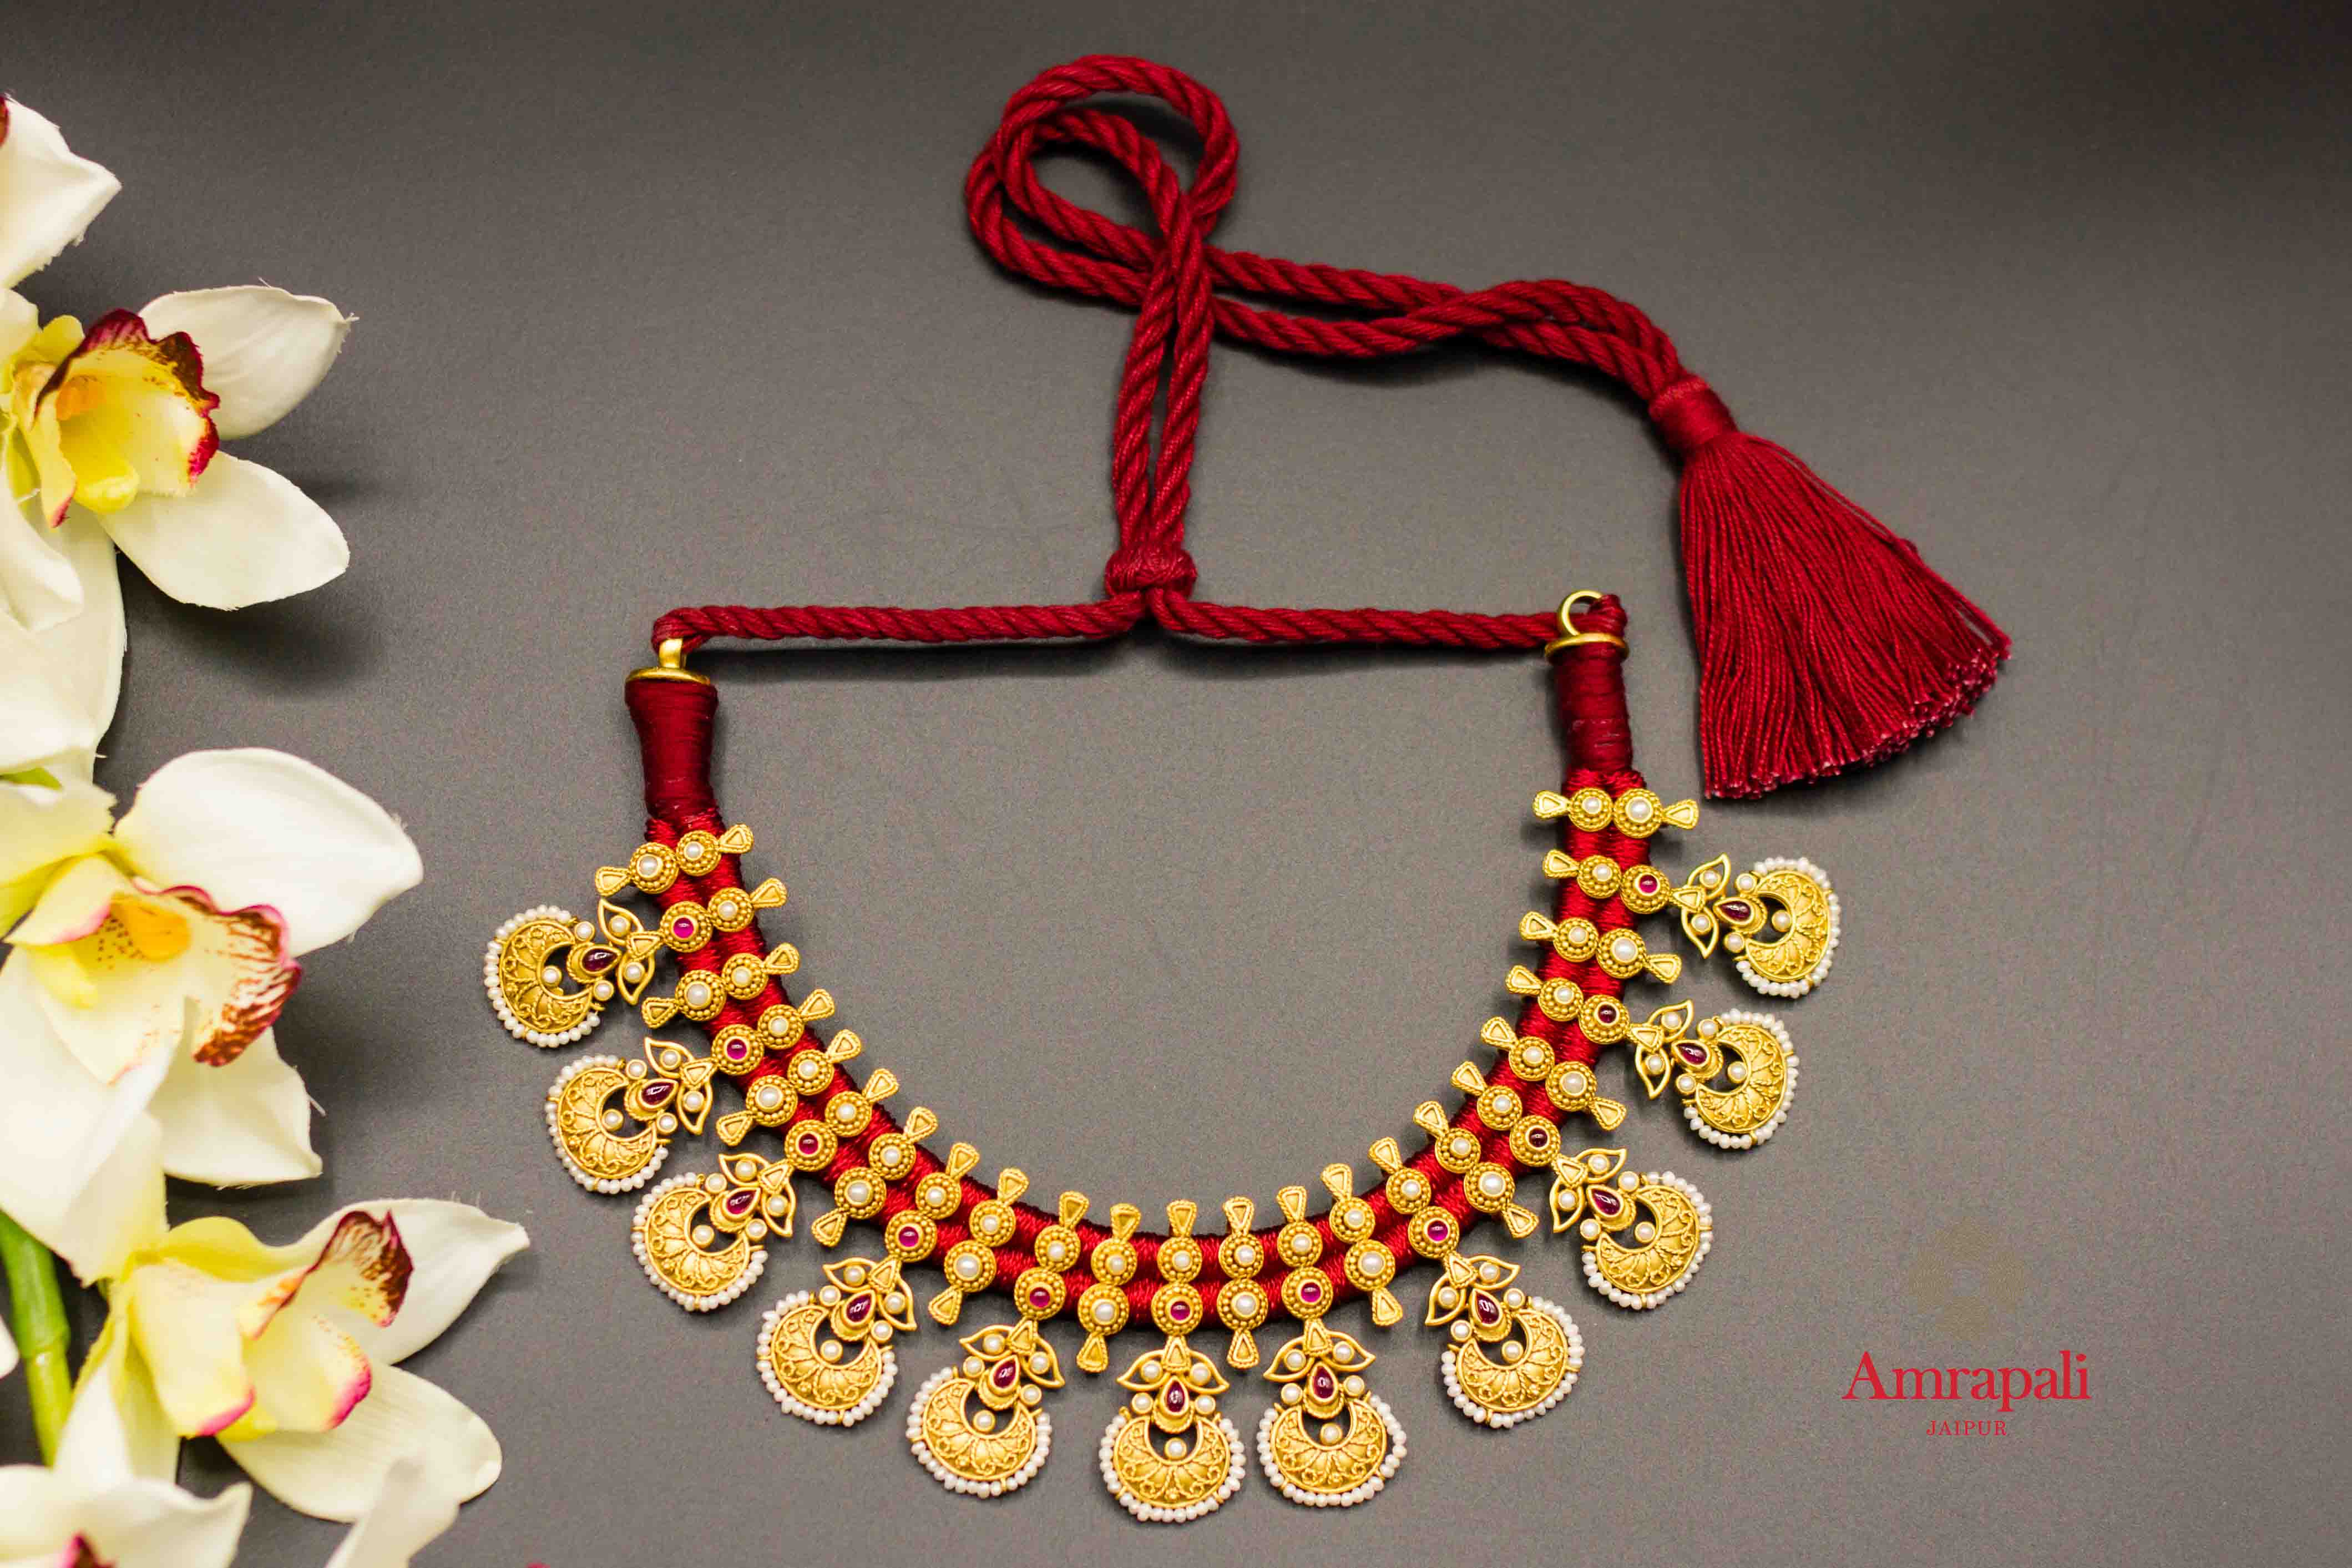 Shop silver gold plated pearl and stone Amrapali thread necklace online in USA. Raise your ethnic style quotient on special occasions with exquisite Indian jewelry from Pure Elegance Indian clothing store in USA. Enhance your Indian look with silver gold plated jewelry, necklaces, silver jewelry available online.-flatlay